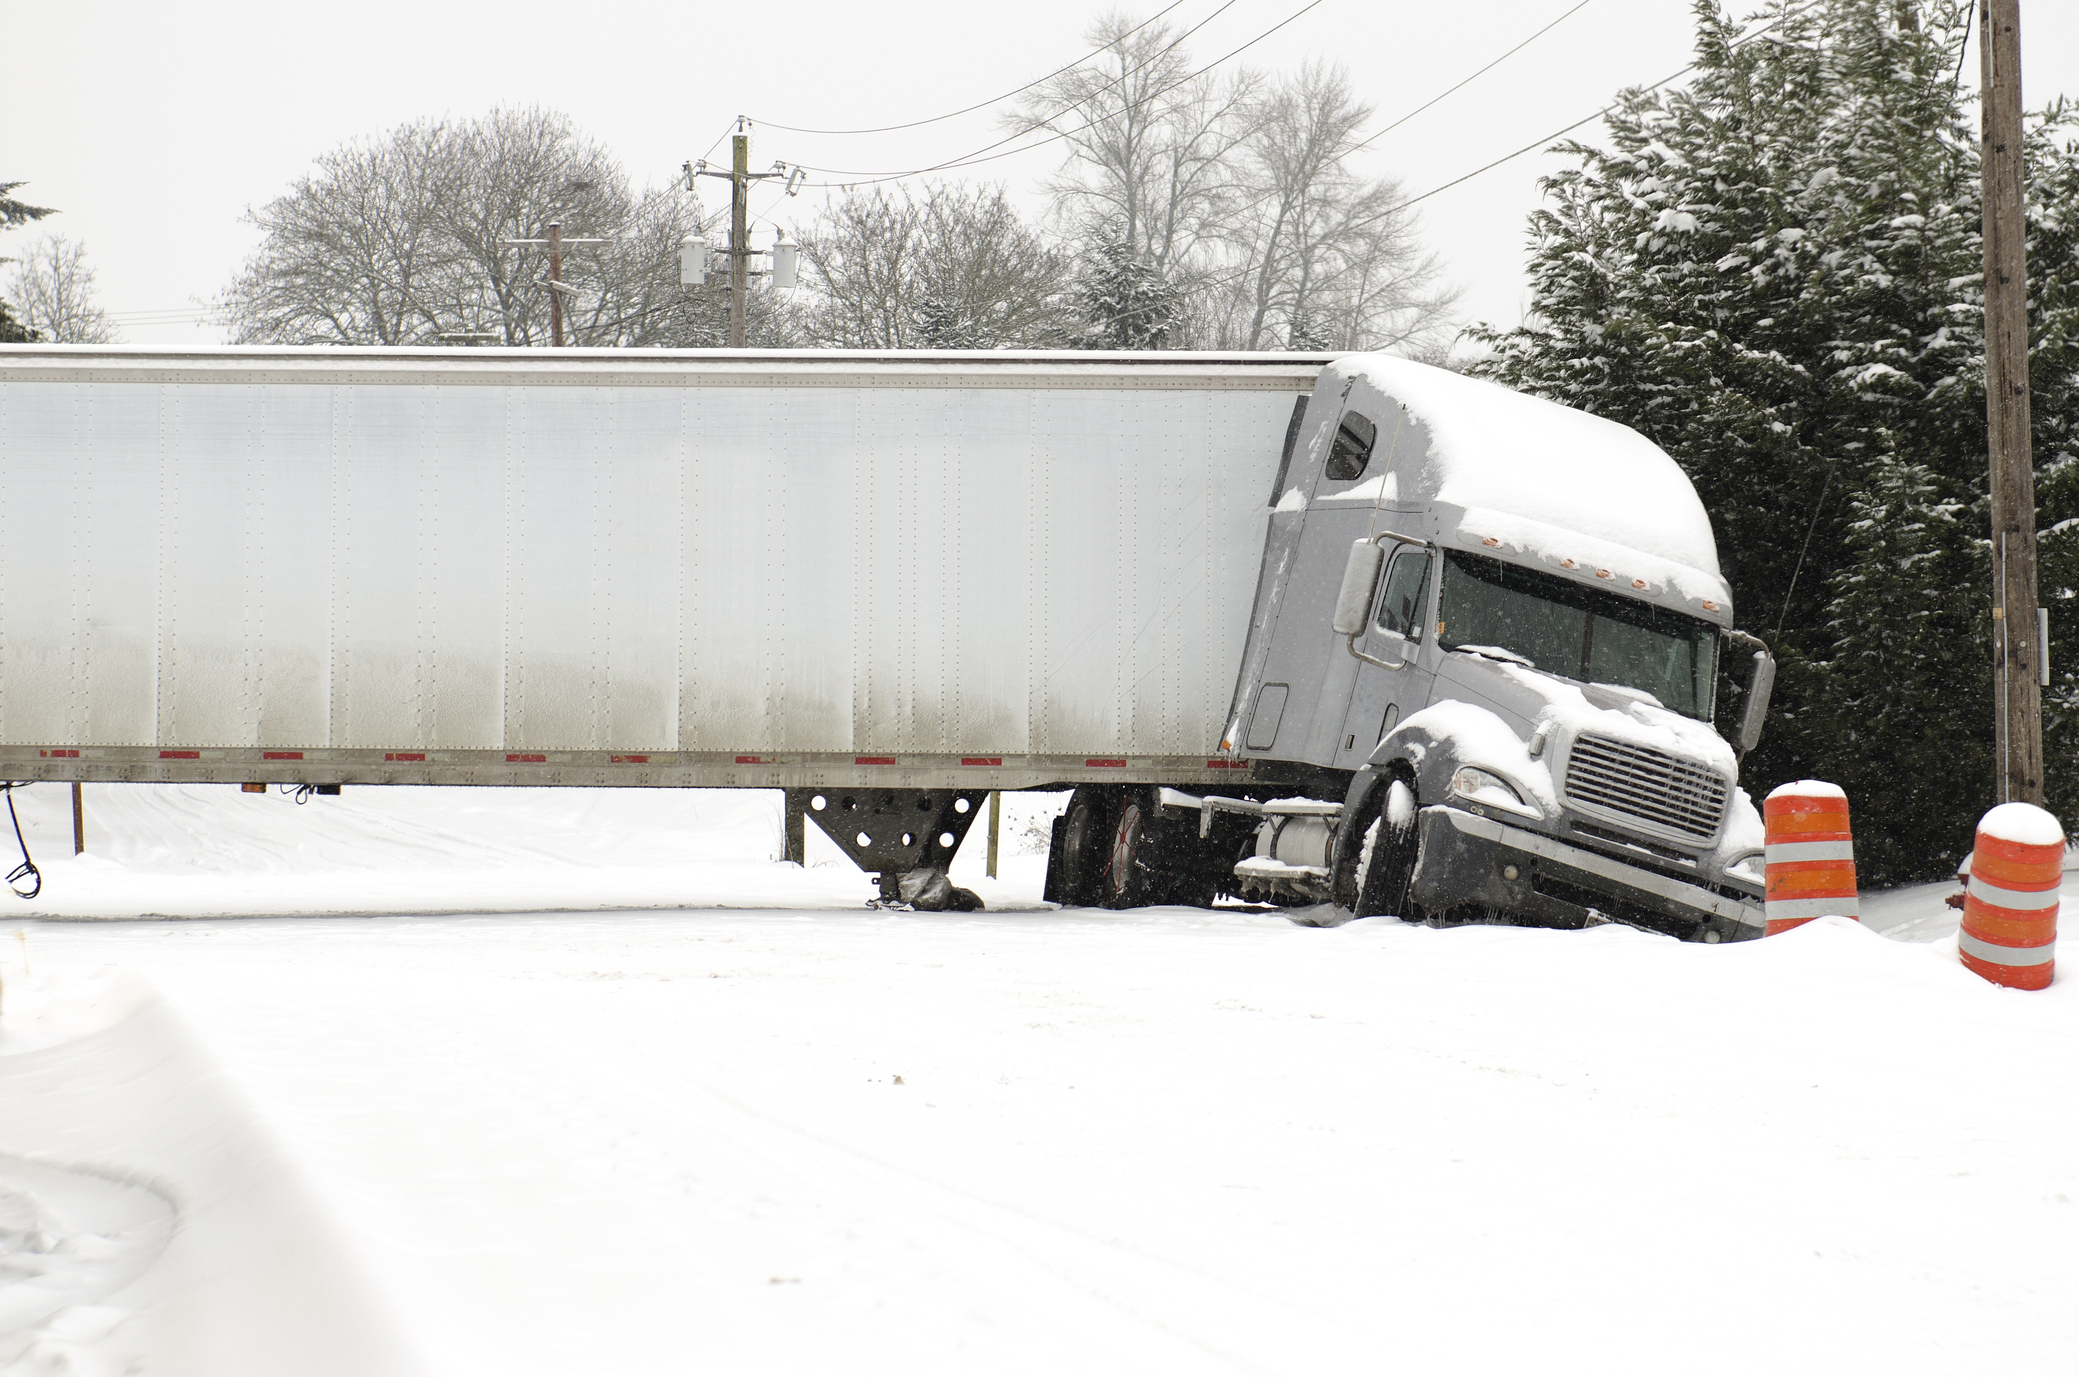 Truck Accident on Snowy Roads